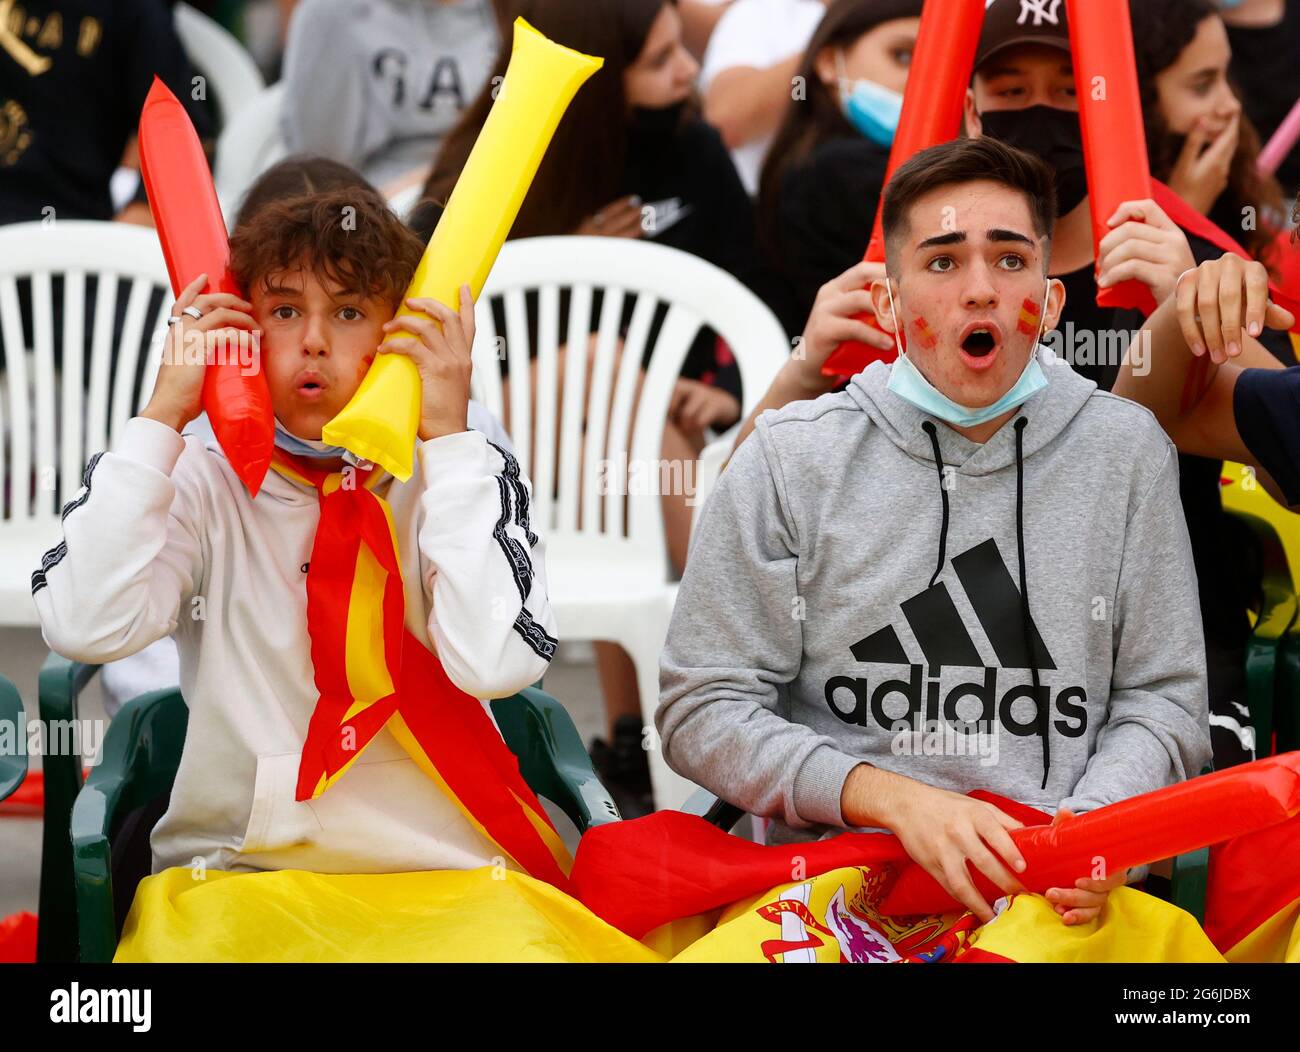 Soccer Football - Euro 2020 - Fans gather for Italy v Spain - Grinon, Spain  - July 6, 2021 Spain fans react during the match REUTERS/Sergio Perez Stock  Photo - Alamy